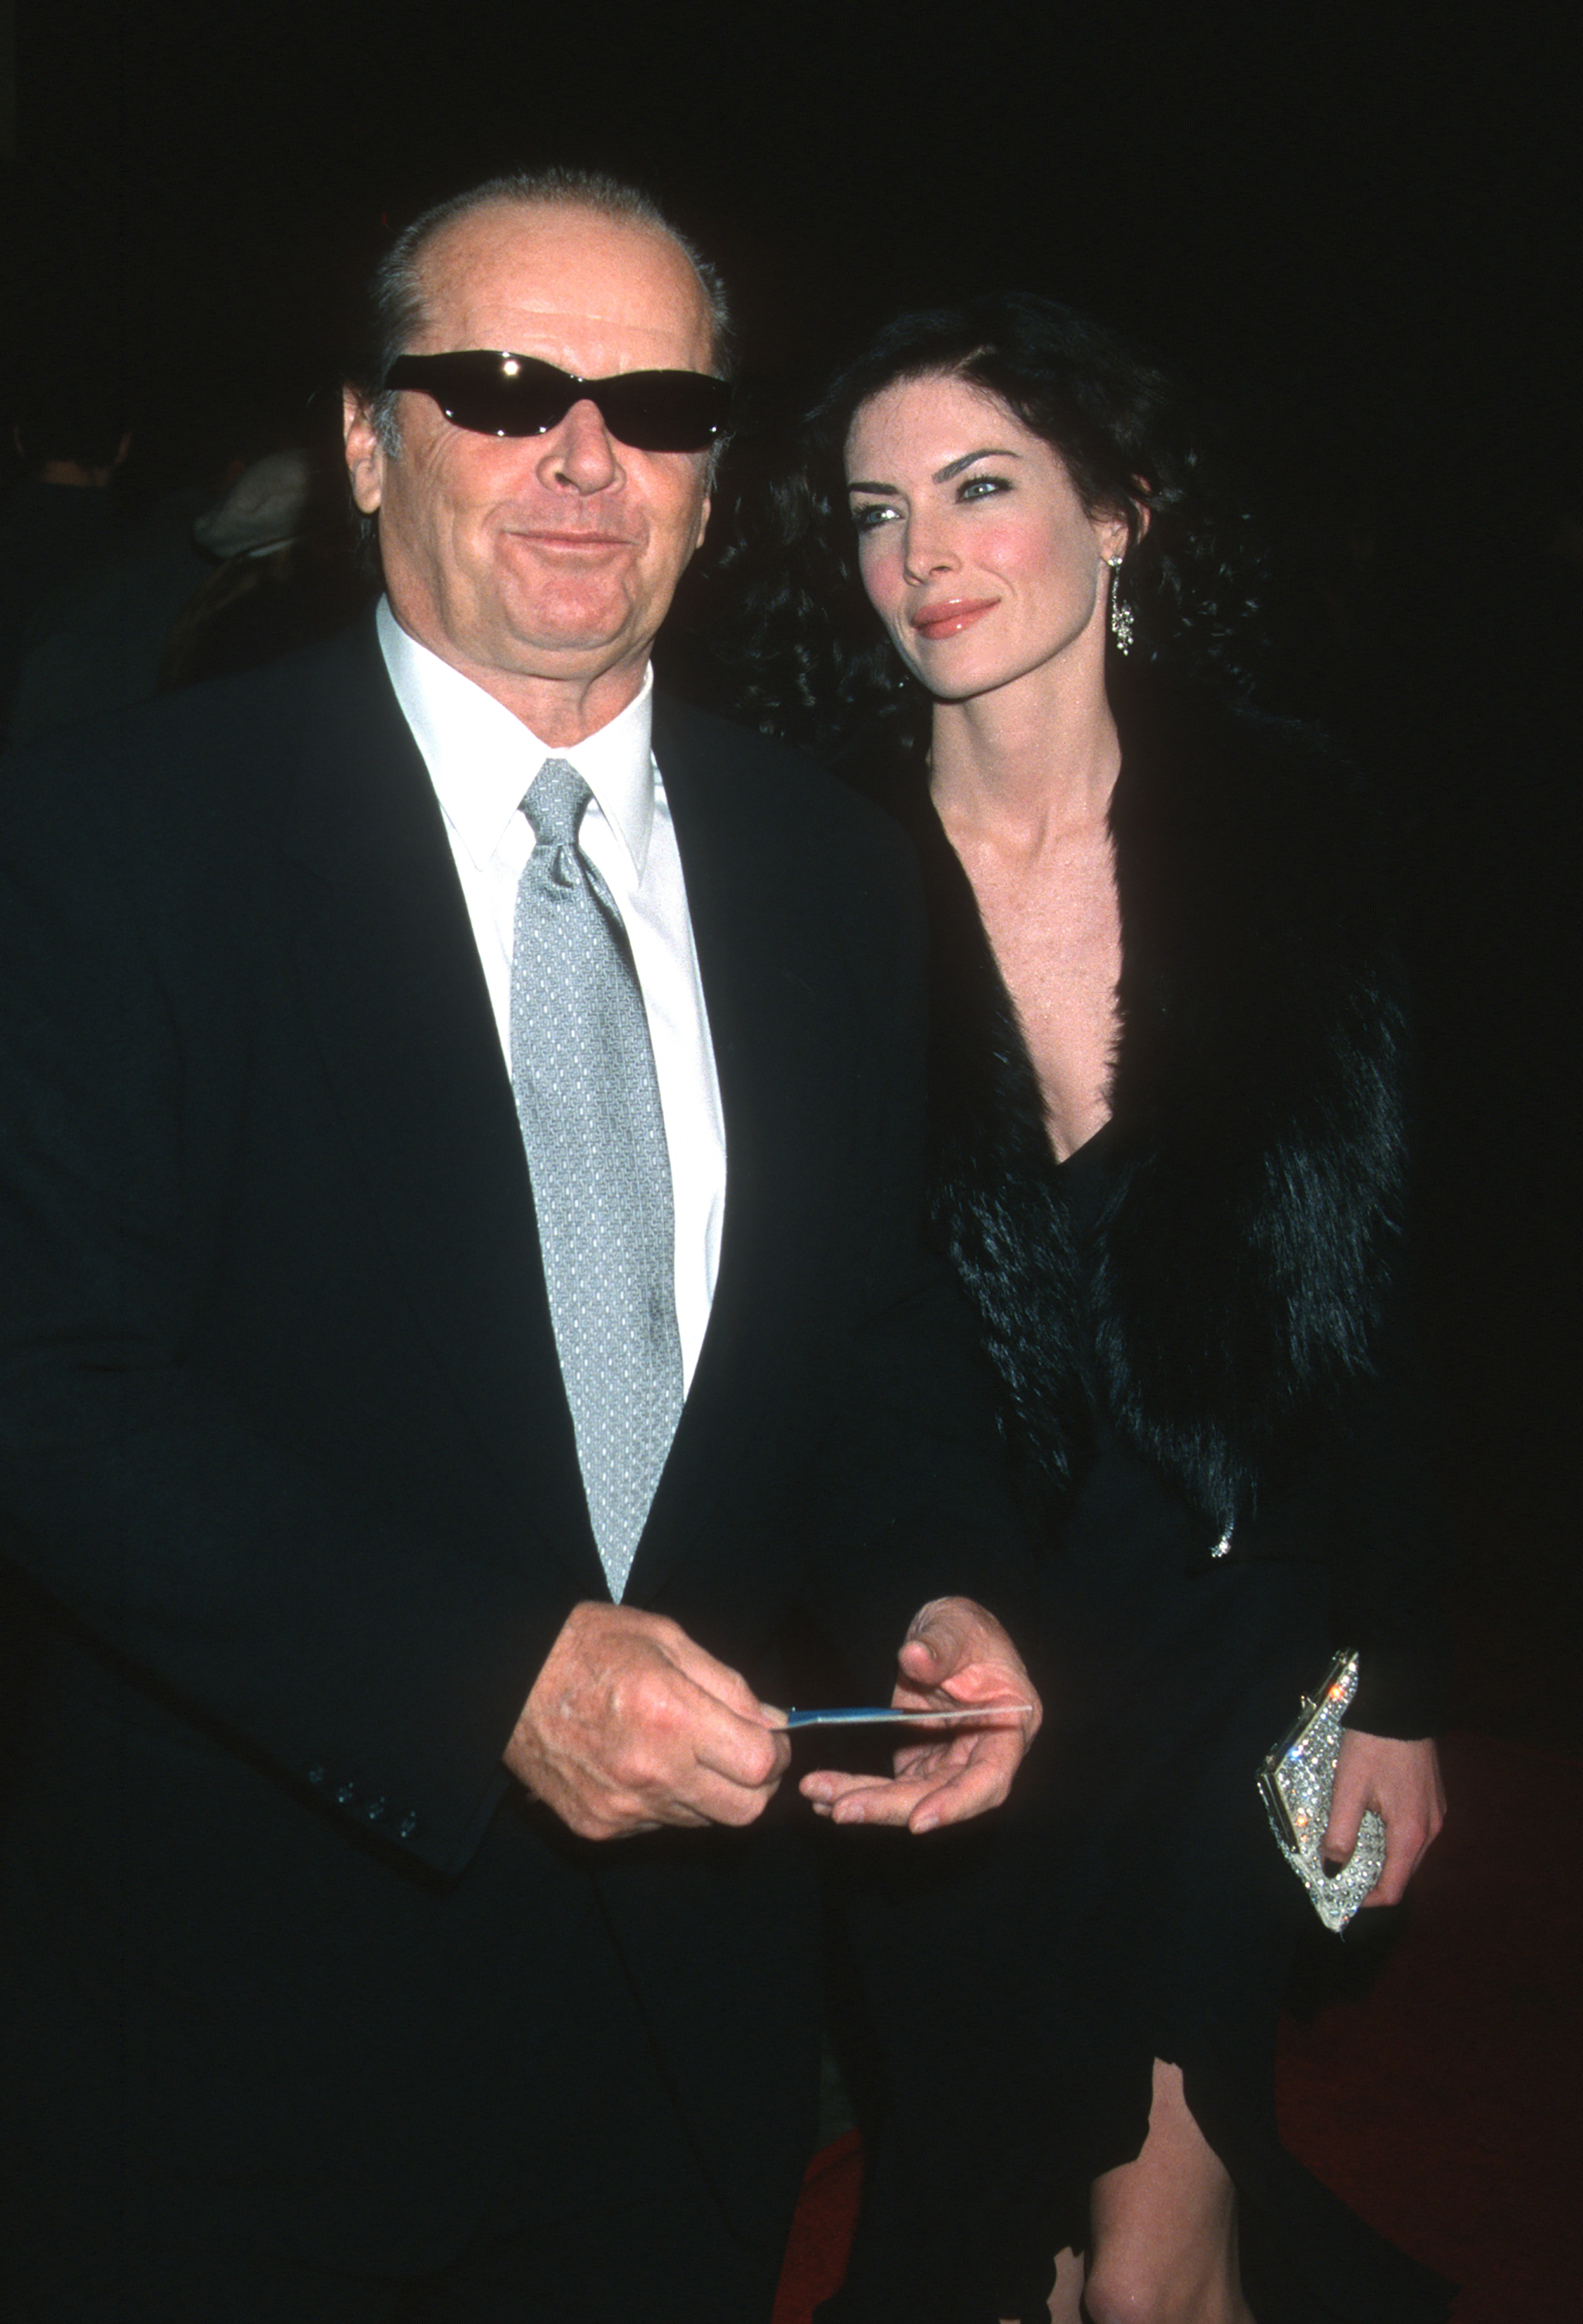 Jack Nicholson and Lara Flynn Boyle attend an event in Hollywood | Source: Getty Images